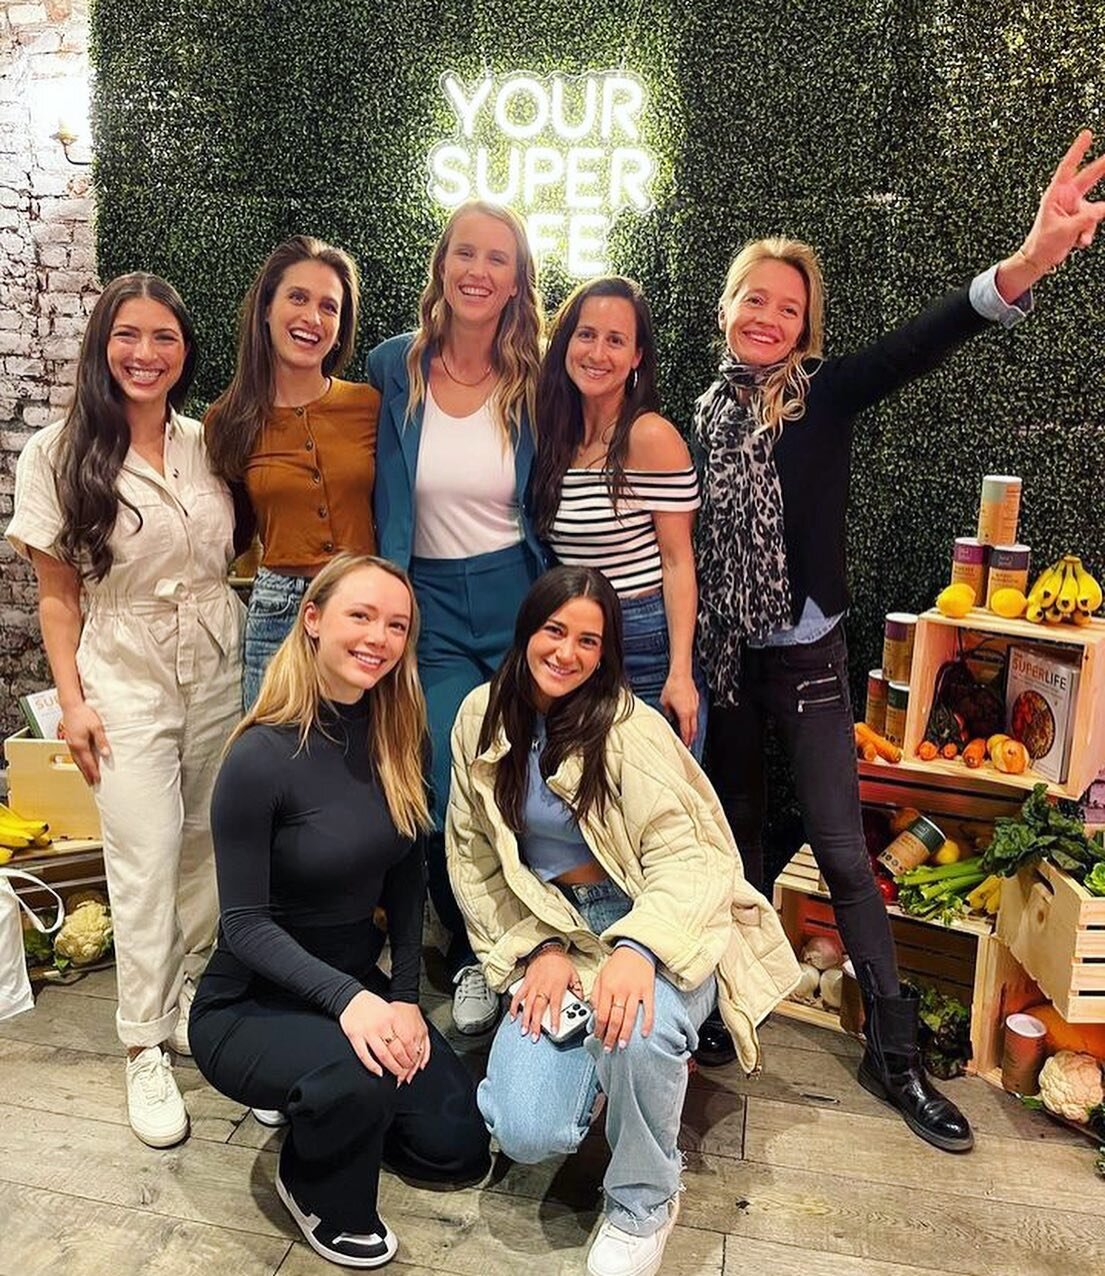 🌱What an awesome event celebrating the book launch for @yoursuperfoods with lots of yummy superfood drinks and food!! I loved hearing your story @kristelandmichael and learning more about how this book came to life! 

💭Such inspiring conversations 